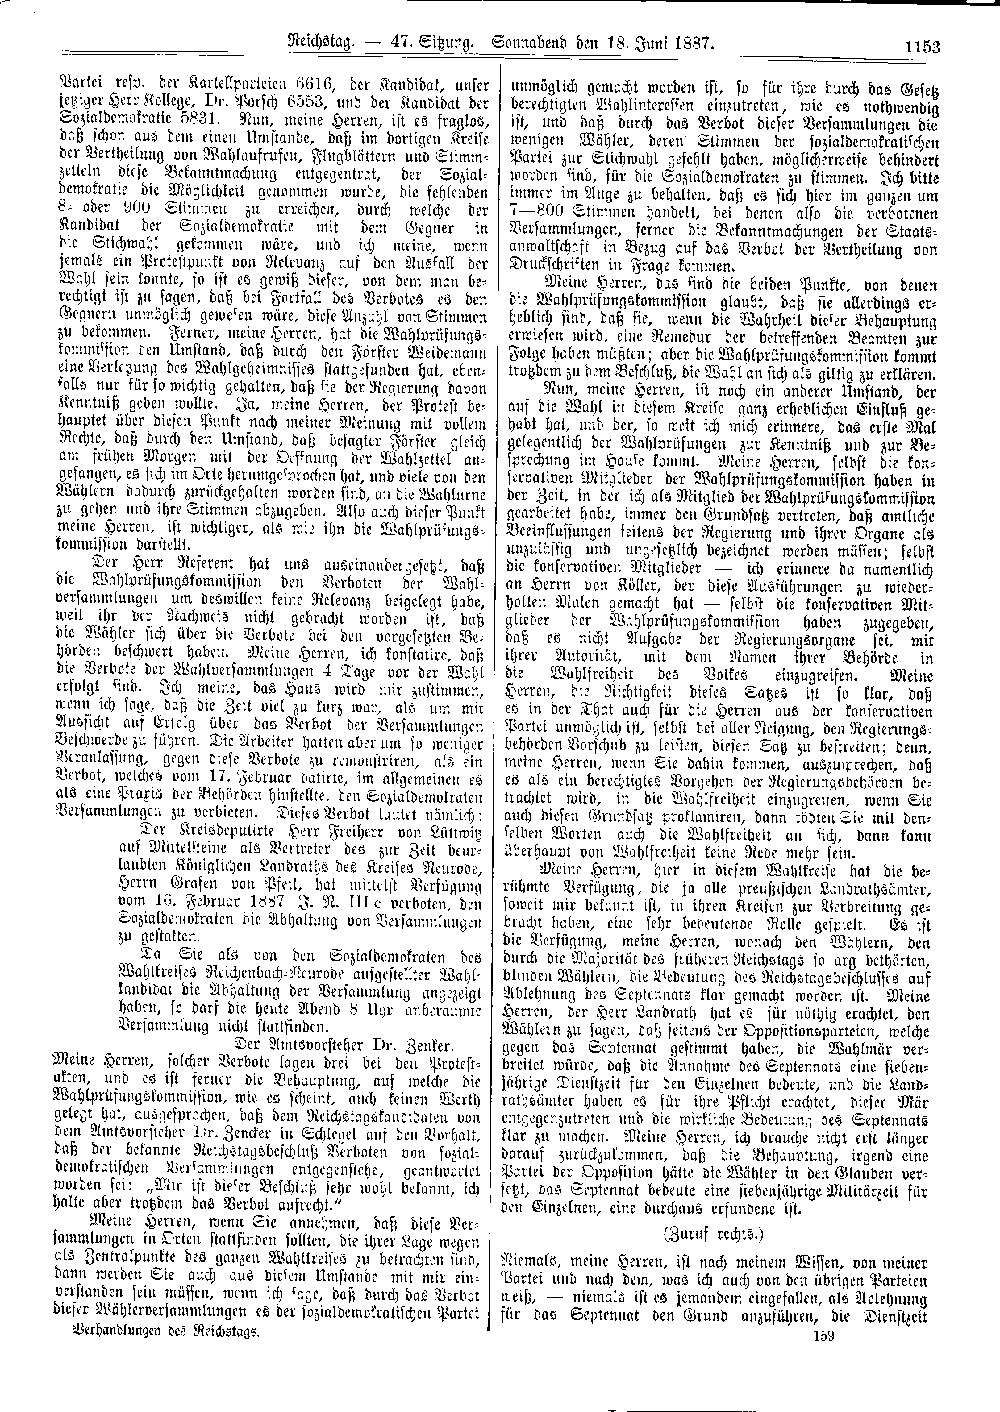 Scan of page 1153